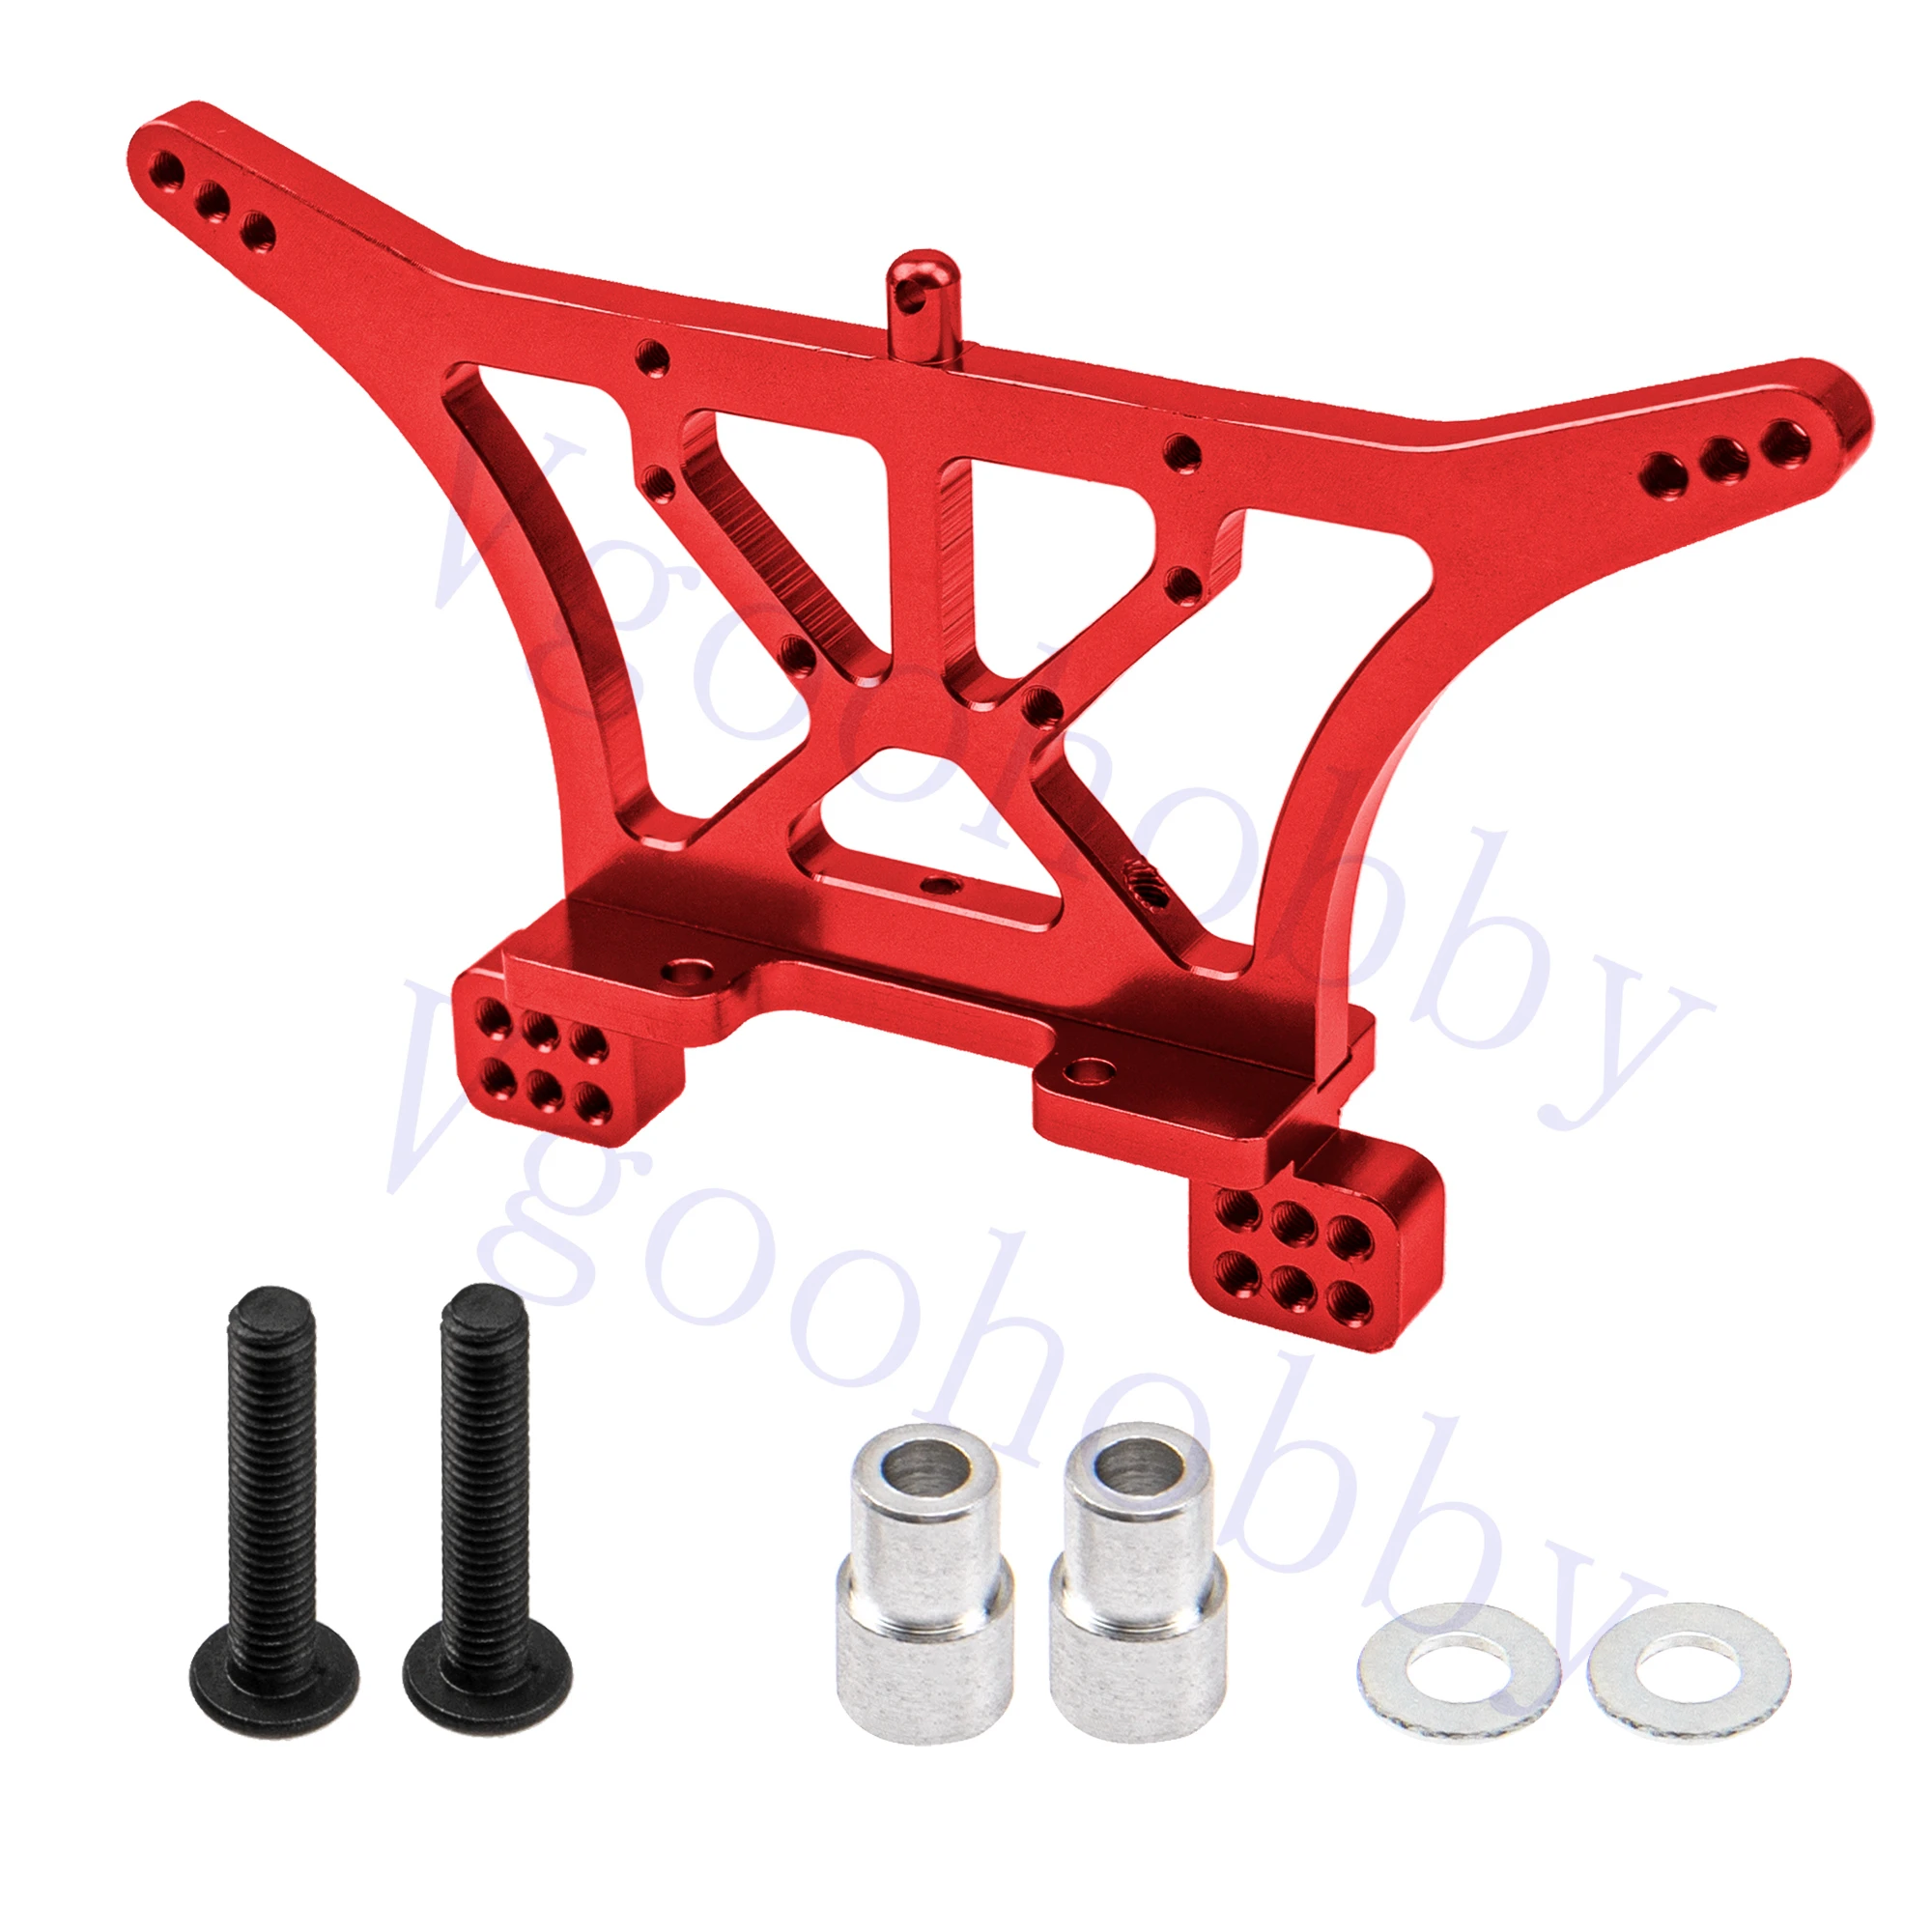 

Aluminum Alloy Rear Shock Tower Mounts Replacement 3638 for Traxxas 2WD Slash Rustler Ford Stampede F-150 Raptor 1/10 RC Car